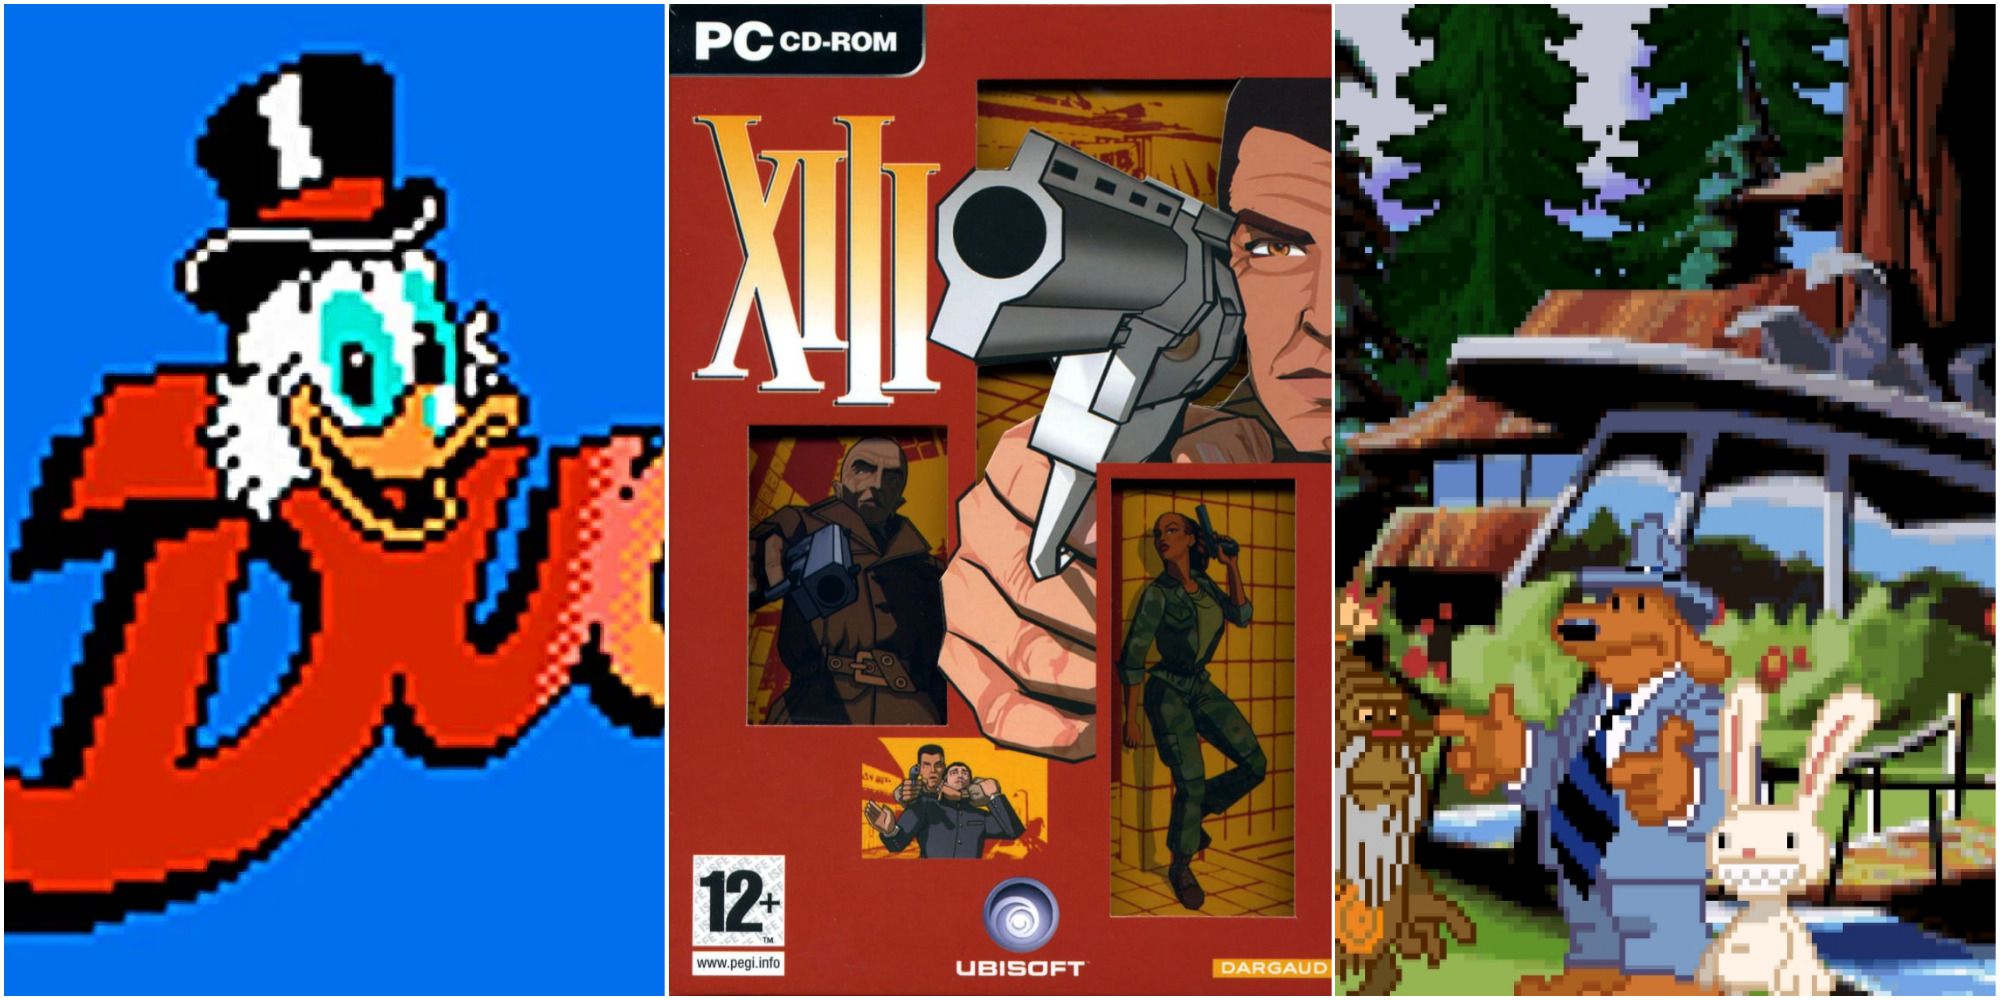 A collage featuring images from Capcom's DuckTales for the NES; Ubisoft's XIII for PC; and LucasArts' Sam & Max Hit The Road for PC